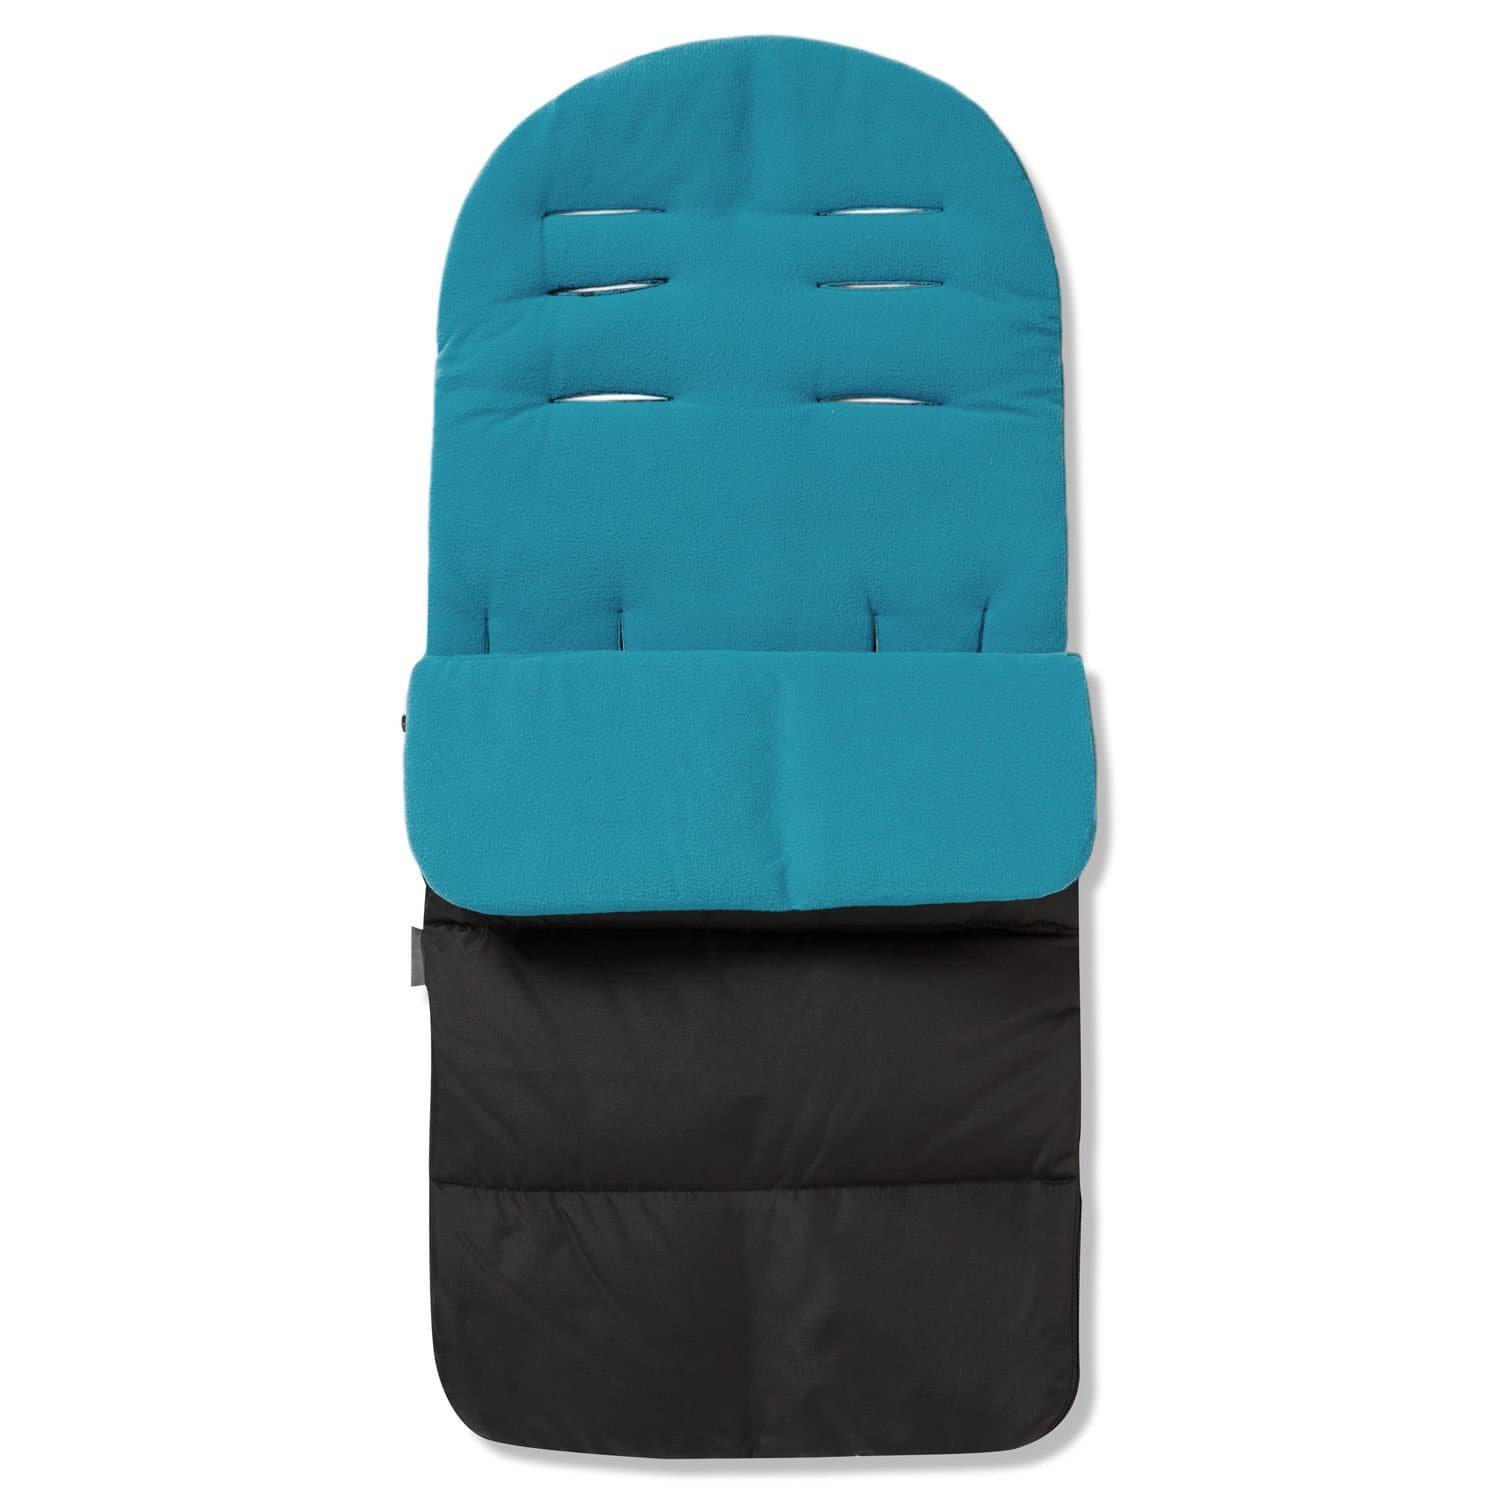 Premium Footmuff / Cosy Toes Compatible with Easywalker - Ocean Blue / Fits All Models | For Your Little One